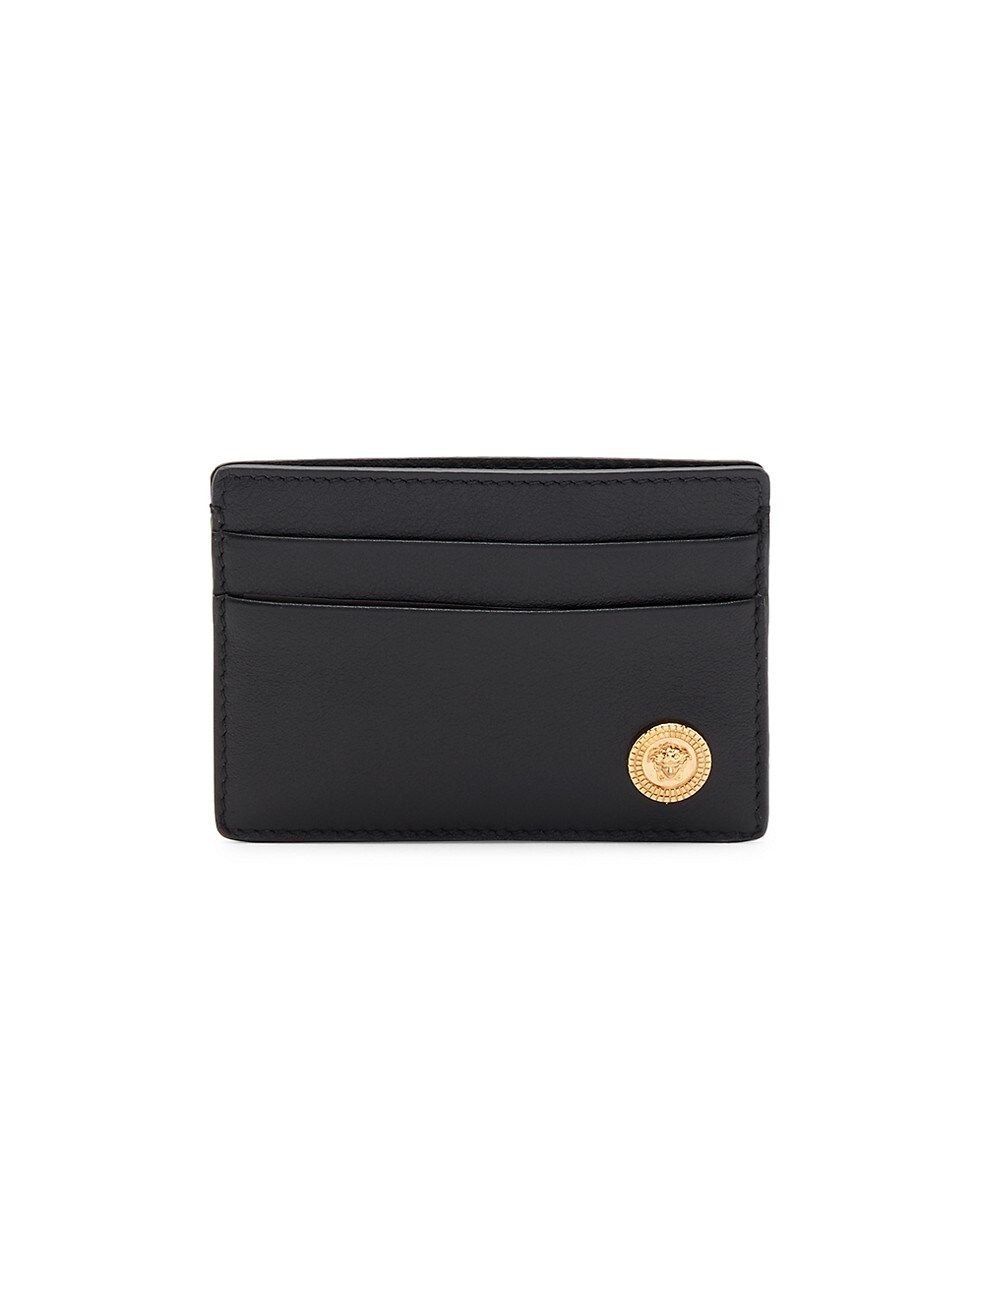 Versace Smooth Leather Cardholder | Saks Fifth Avenue